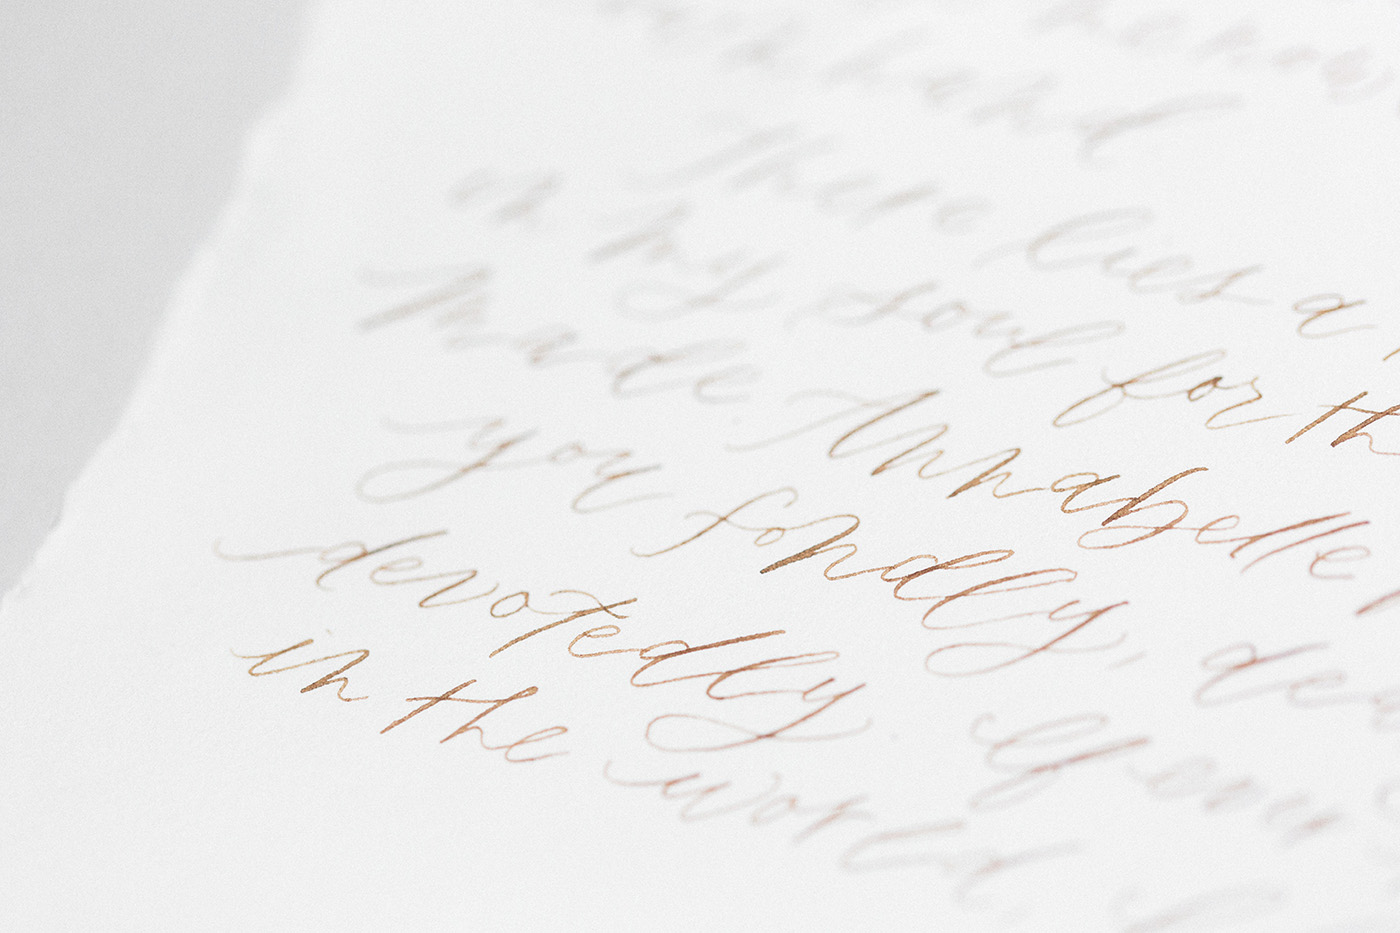 It is Well - Wedding Calligraphy Vows - Sarah Ann Design - Proposal Calligraphy